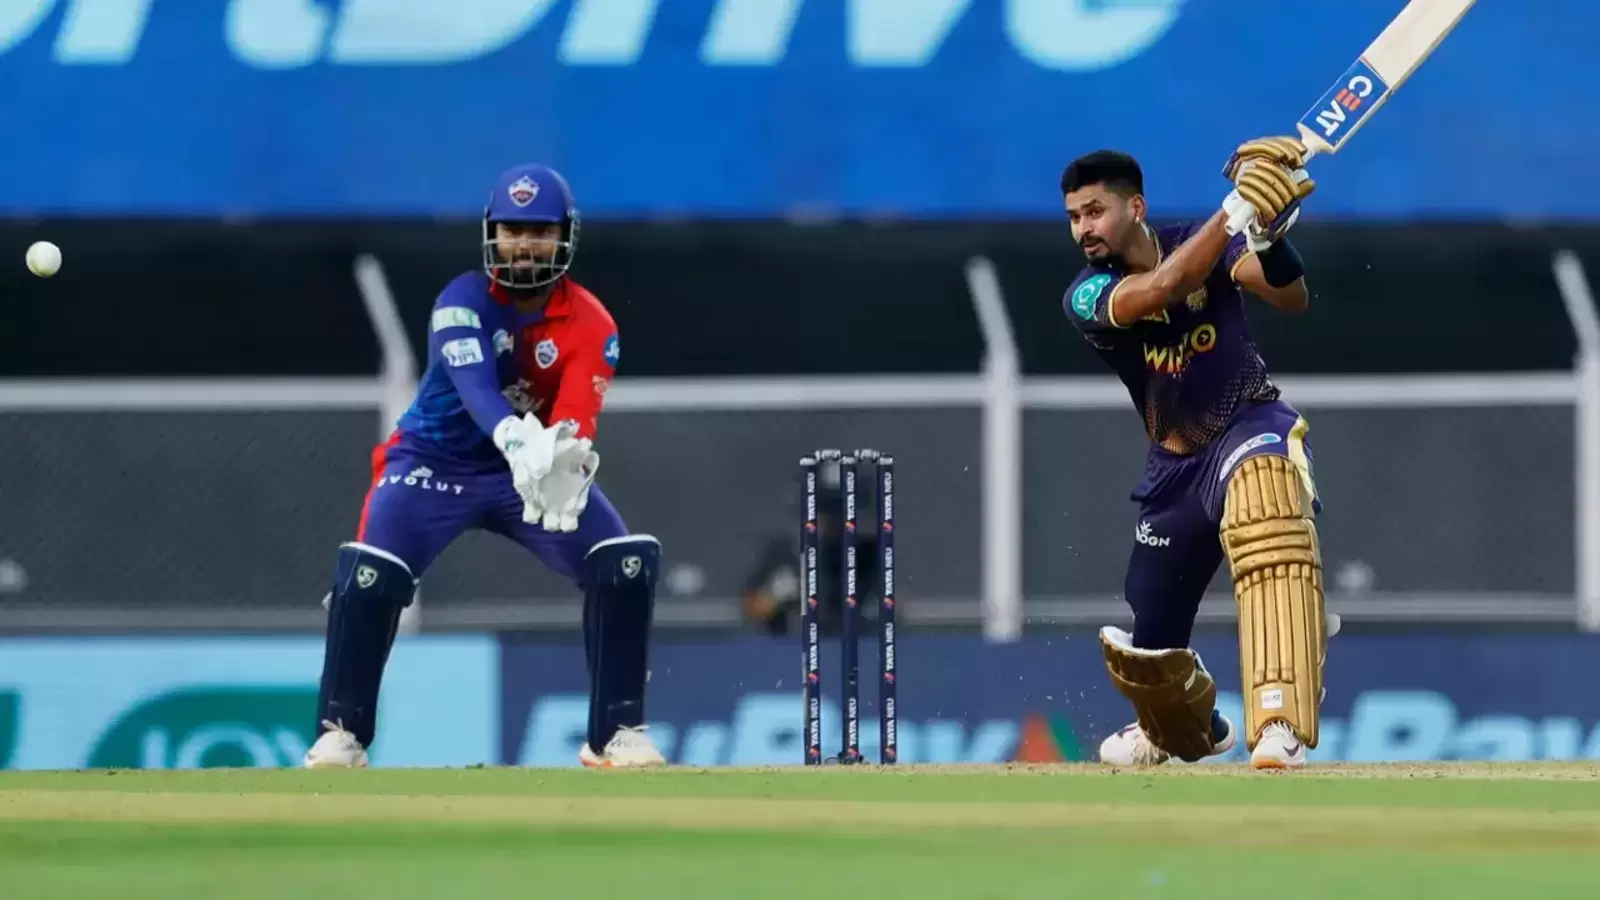 DC vs KKR, IPL 2022 Live Streaming When and where to watch on TV and